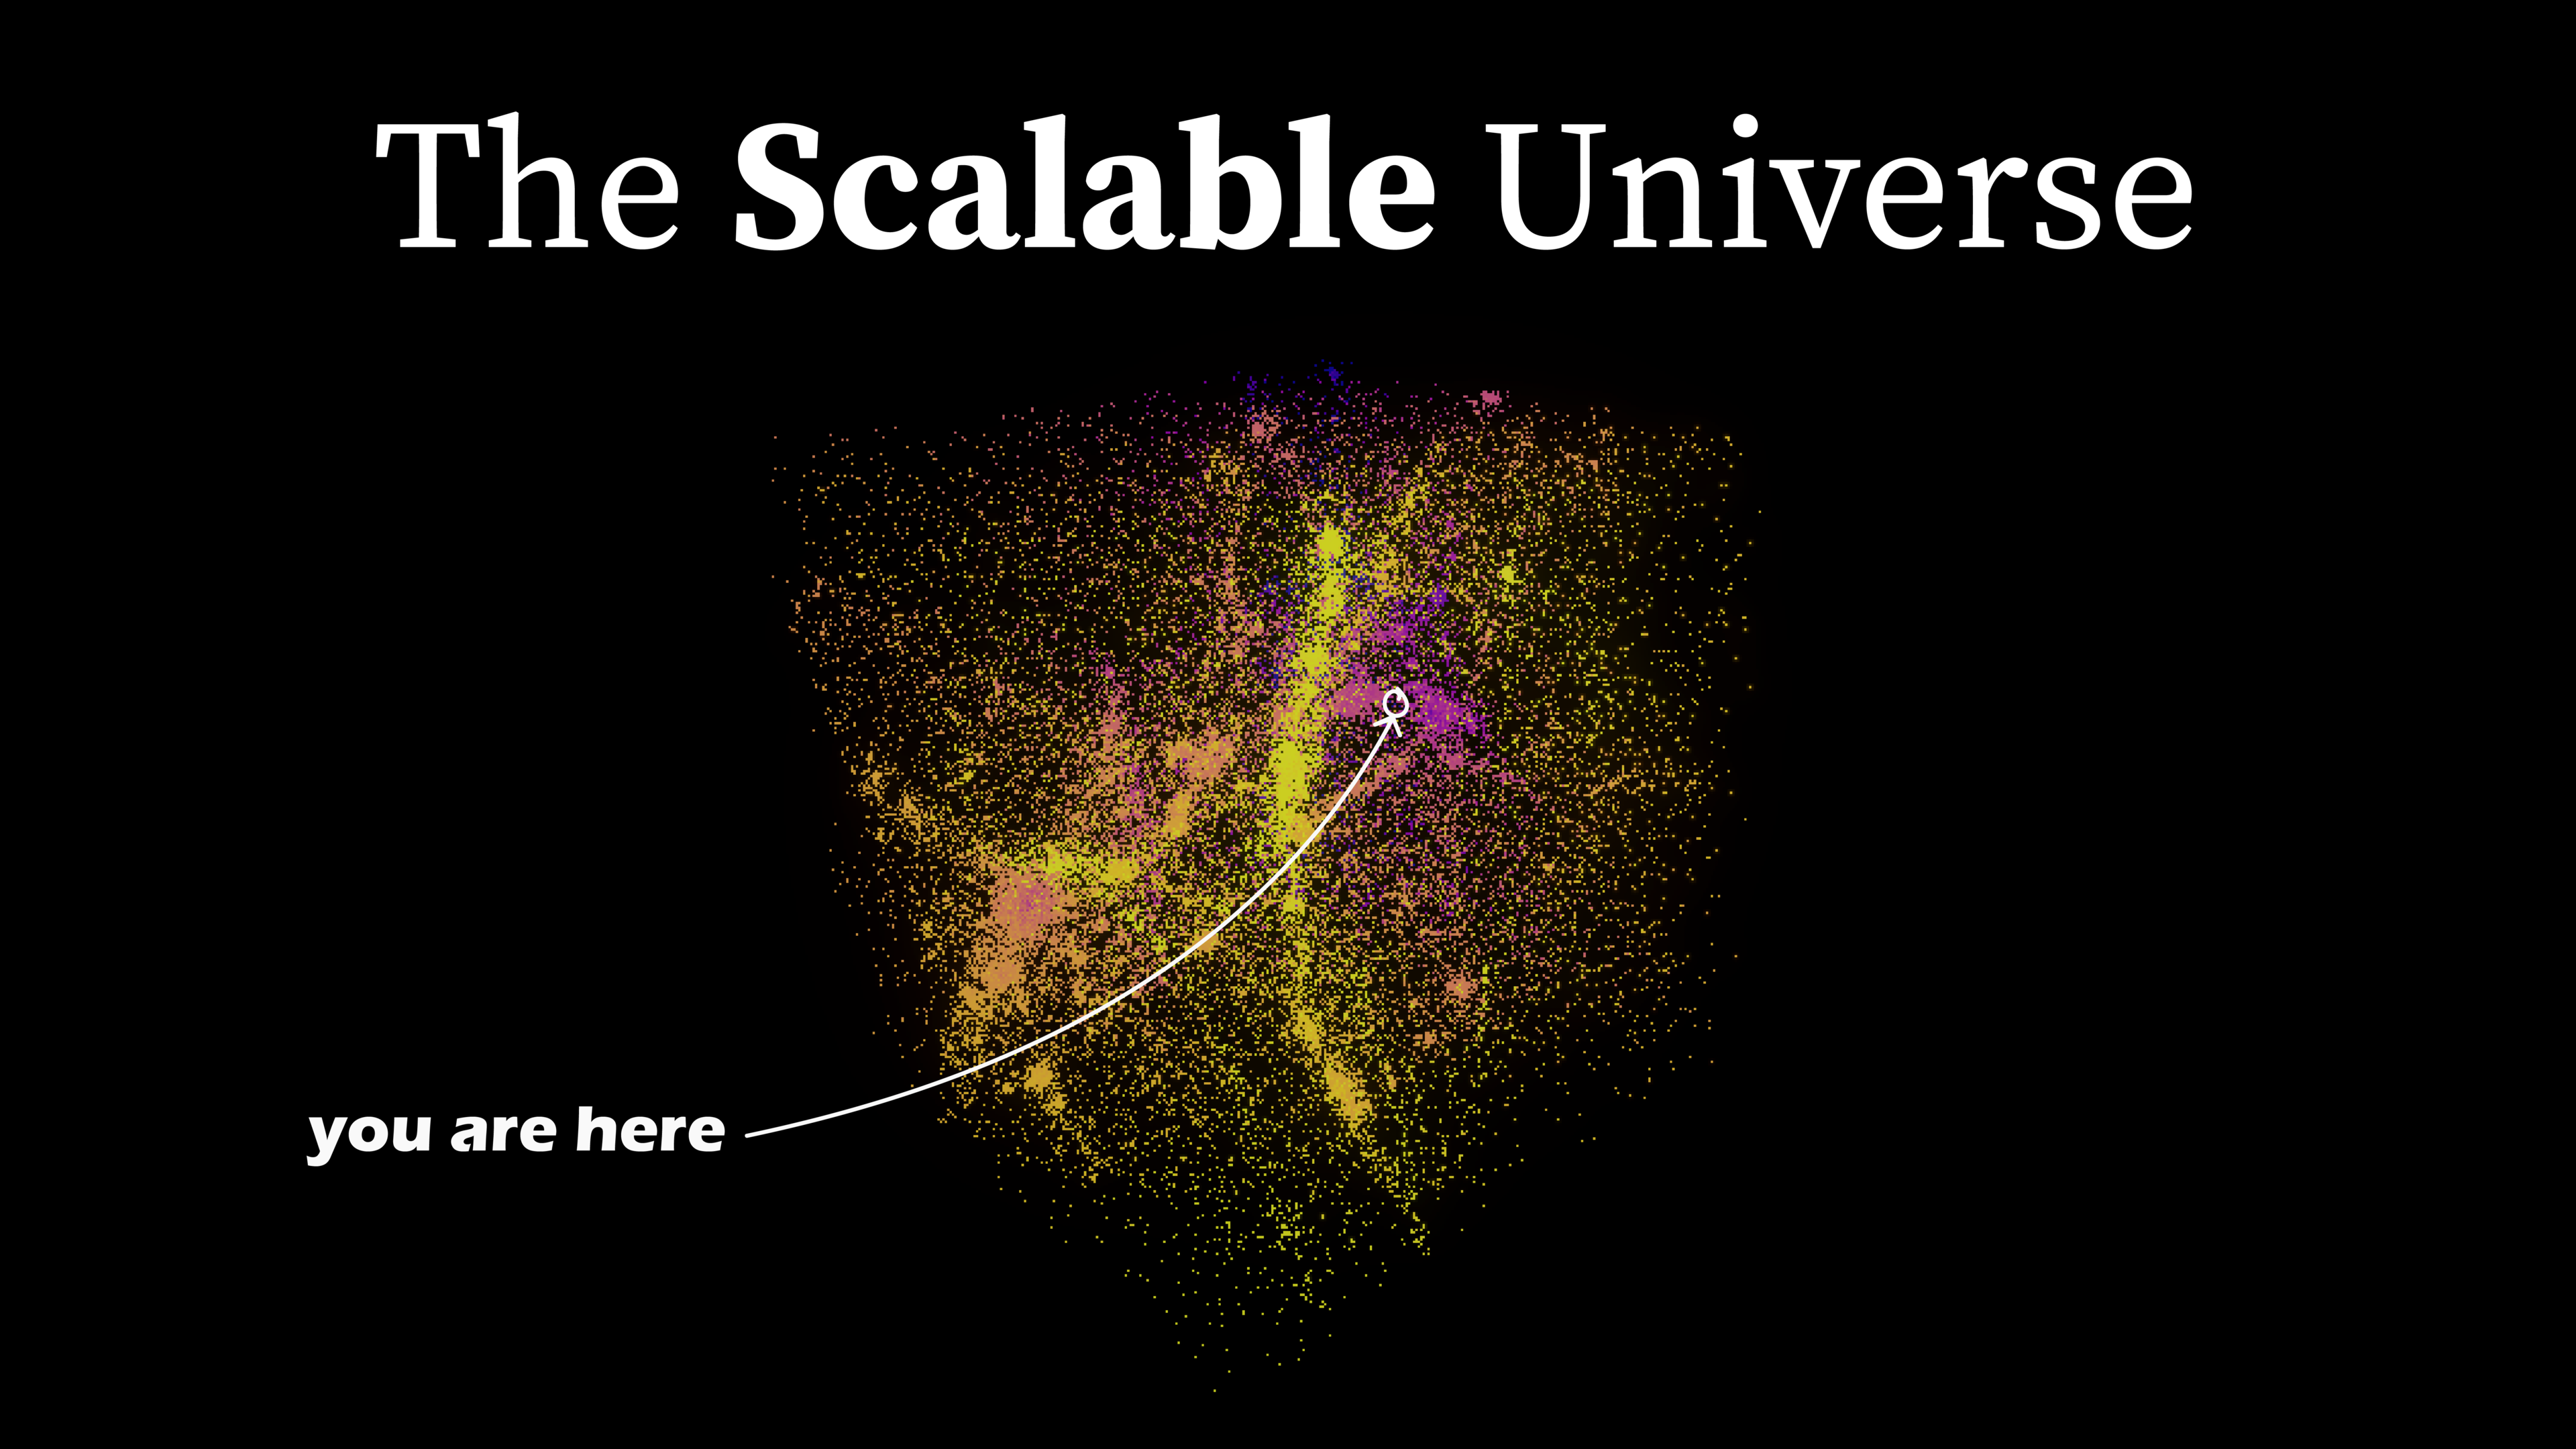 The Scalable Universe